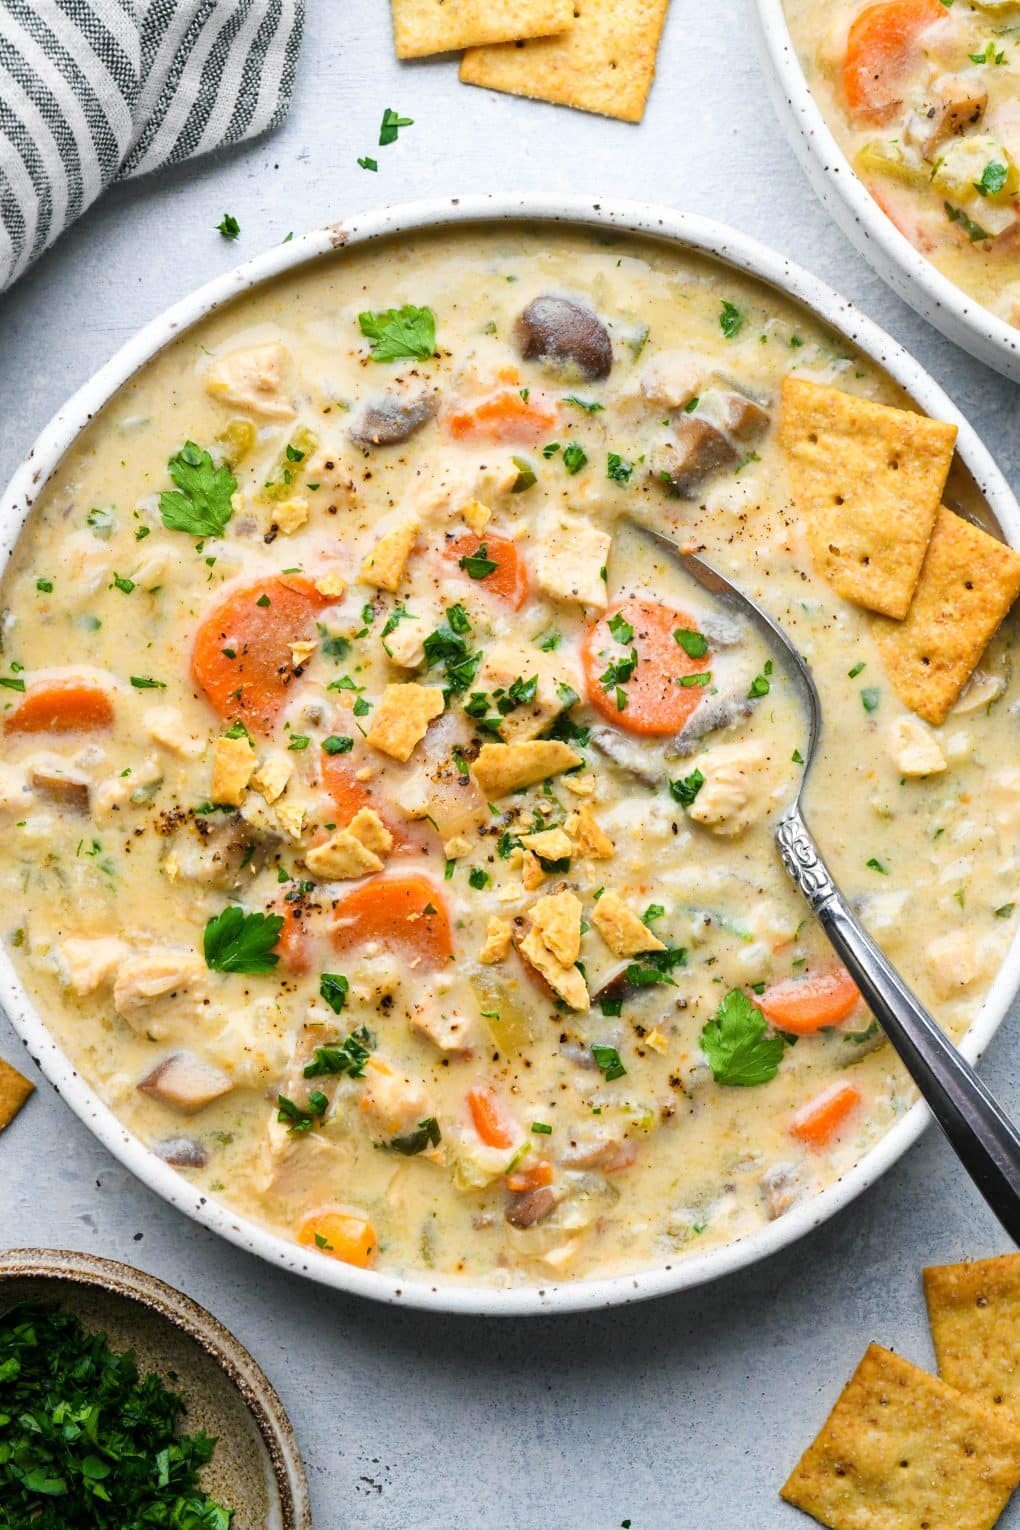 A wide shallow speckled bowl of creamy dairy free chicken and cauliflower rice soup, topped with fresh herbs and gluten free crackers.